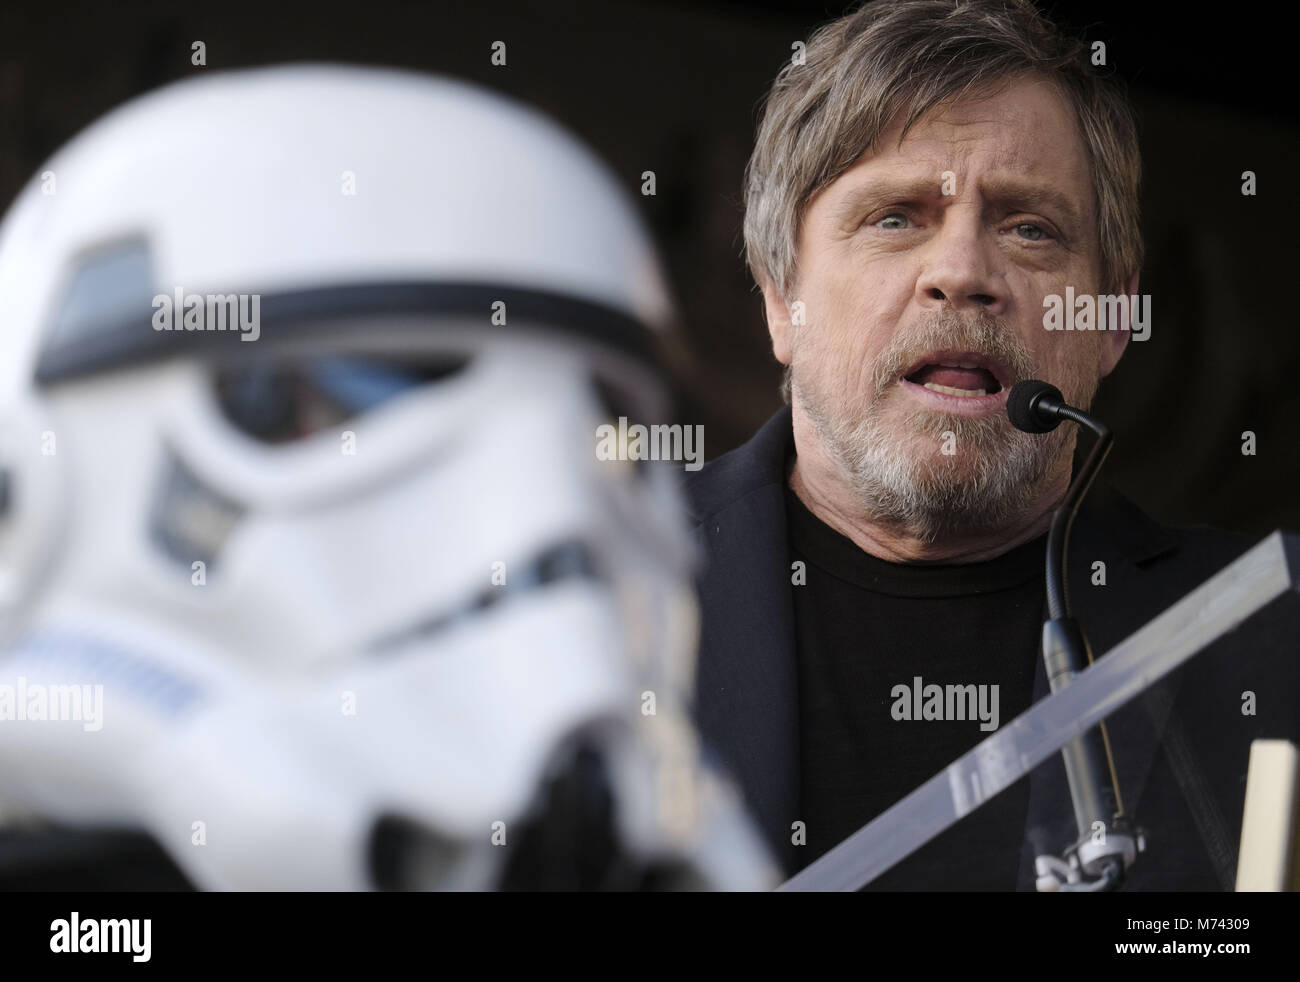 Los Angeles, California, USA. 8th Mar, 2018. Actor Mark Hamill, attends his Hollywood Walk of Fame Star ceremony where he was the recipient of the 2,630th star on the Hollywood Walk of Fame in the category of Motion Pictures on March 8, 2018 in Los Angeles. Credit: Ringo Chiu/ZUMA Wire/Alamy Live News Stock Photo